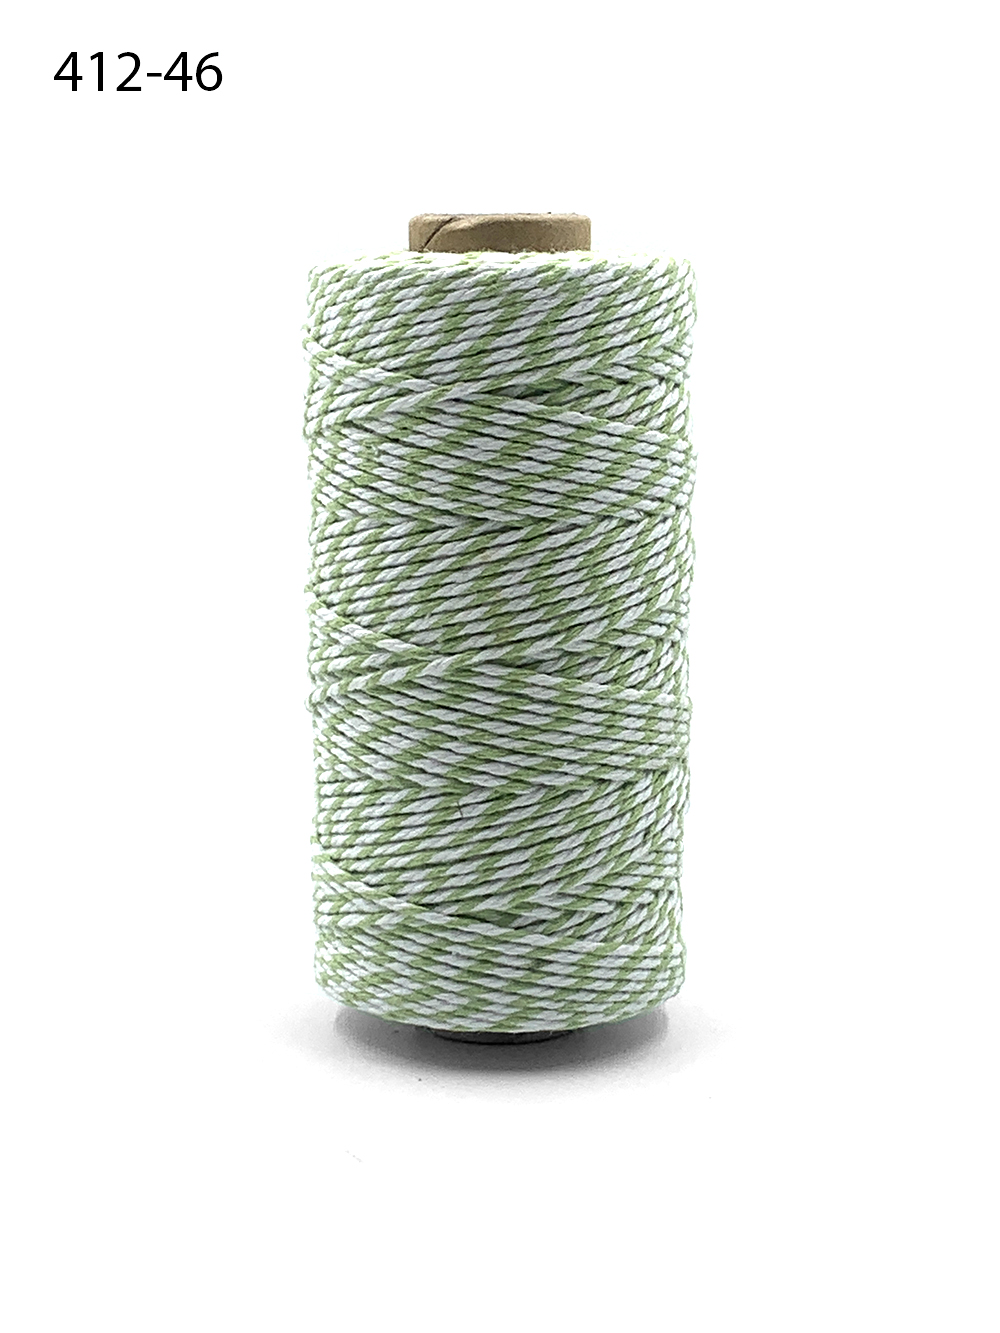 Bakers Green and White Catering Twine 2mm Arts Parcel Crafts String Cotton  100m